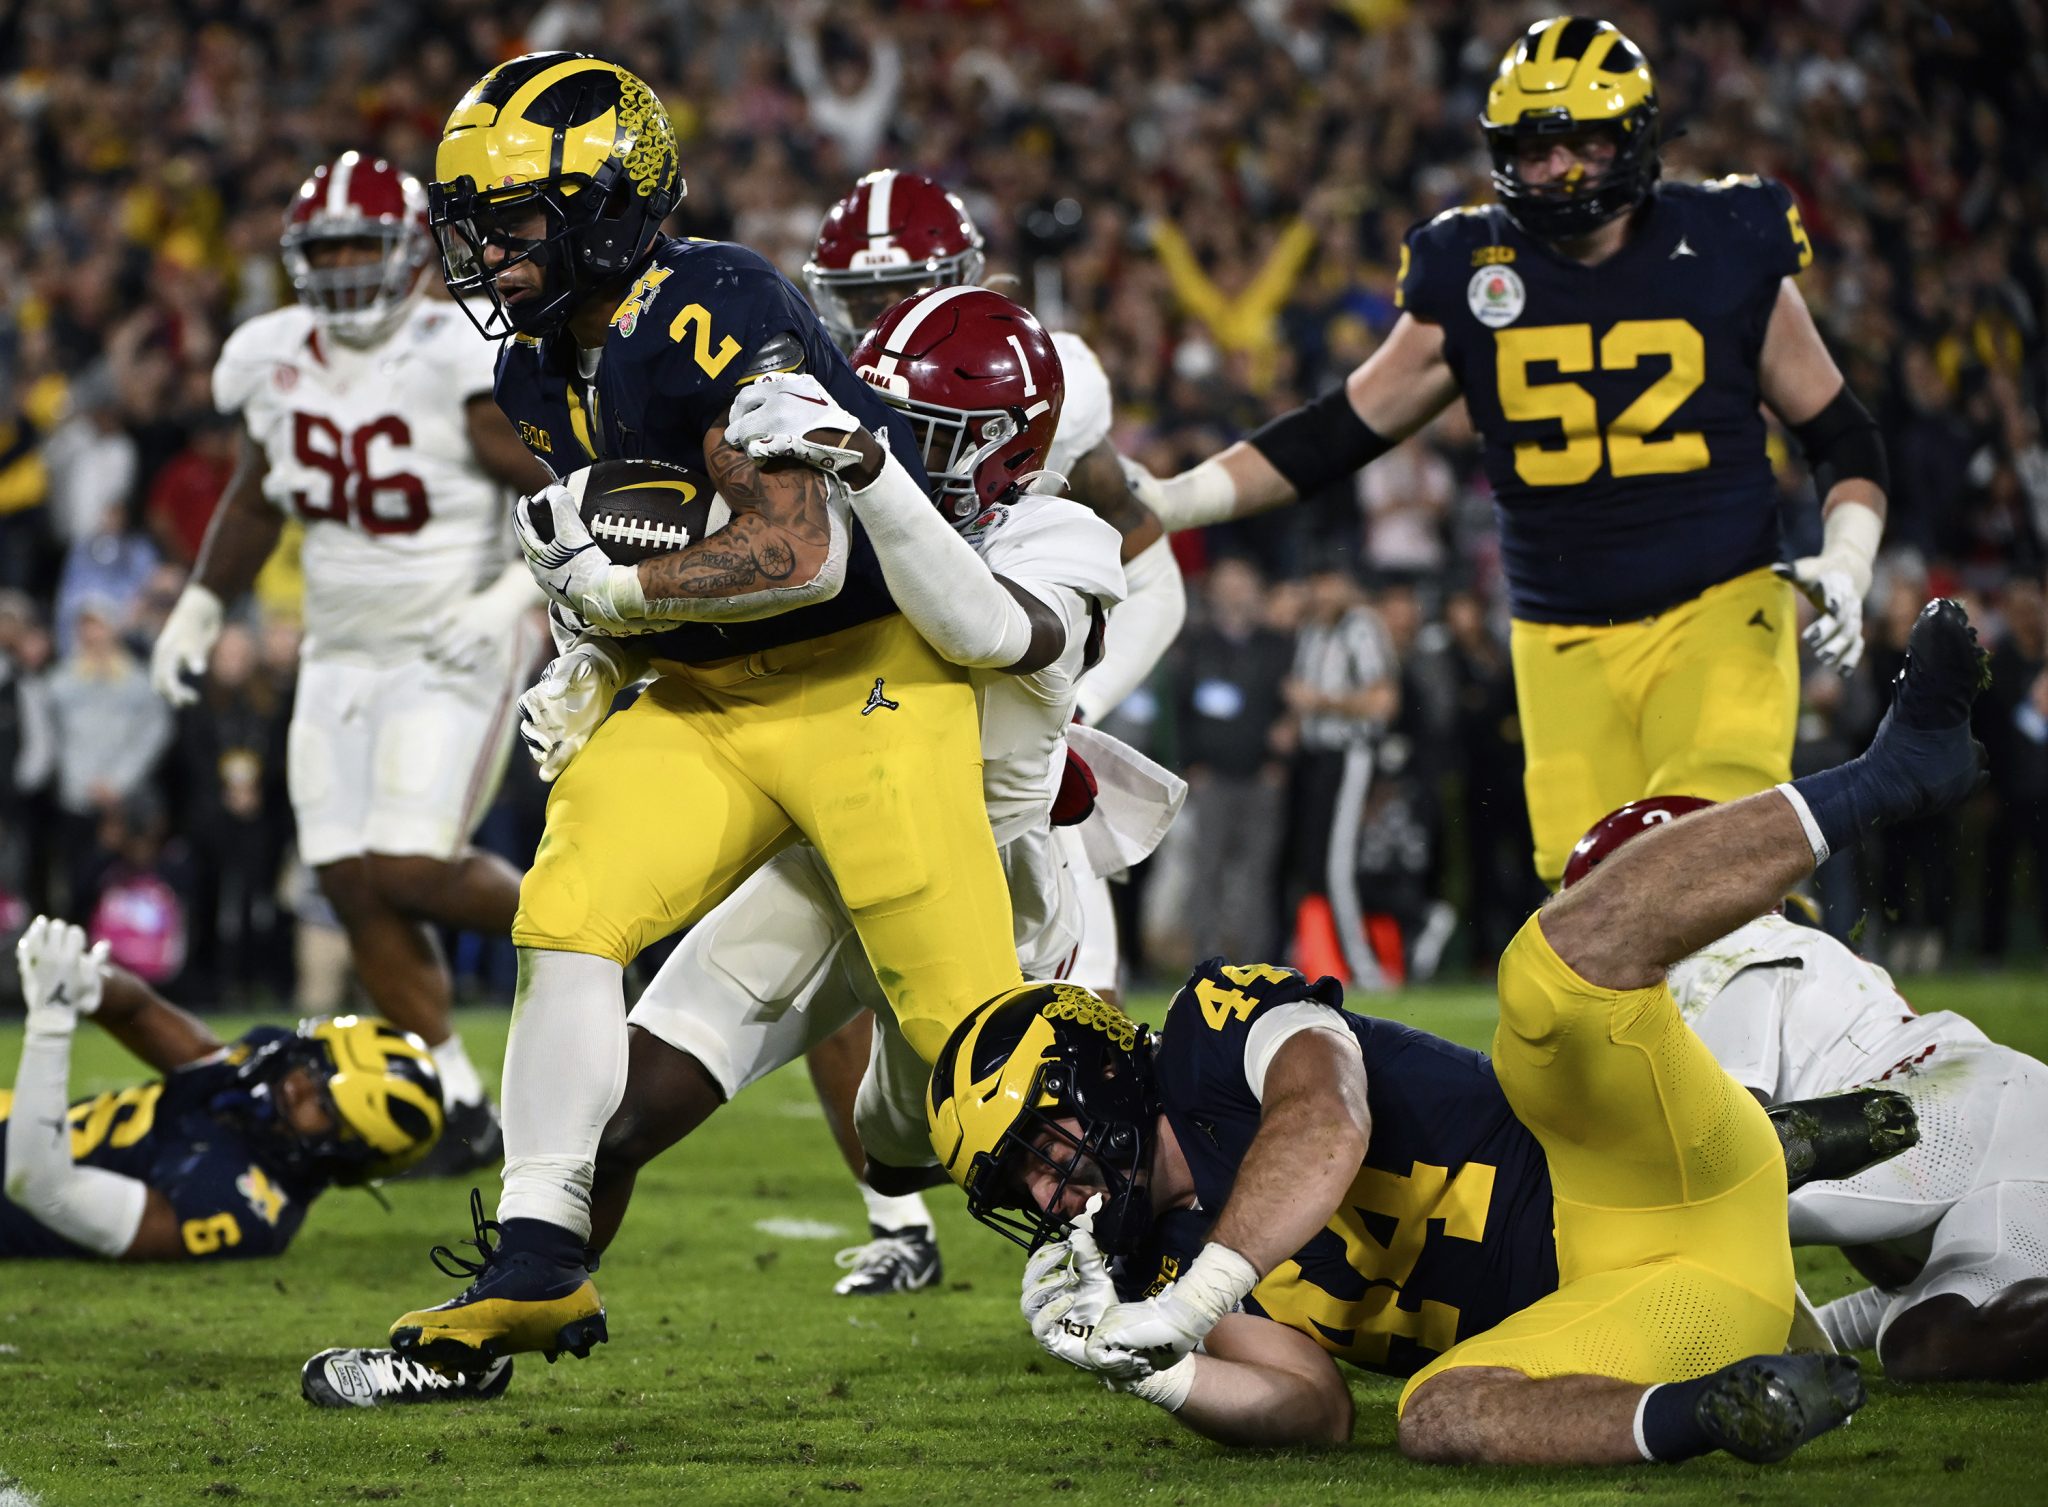 Michigan Wolverines to face off against Washington in college football